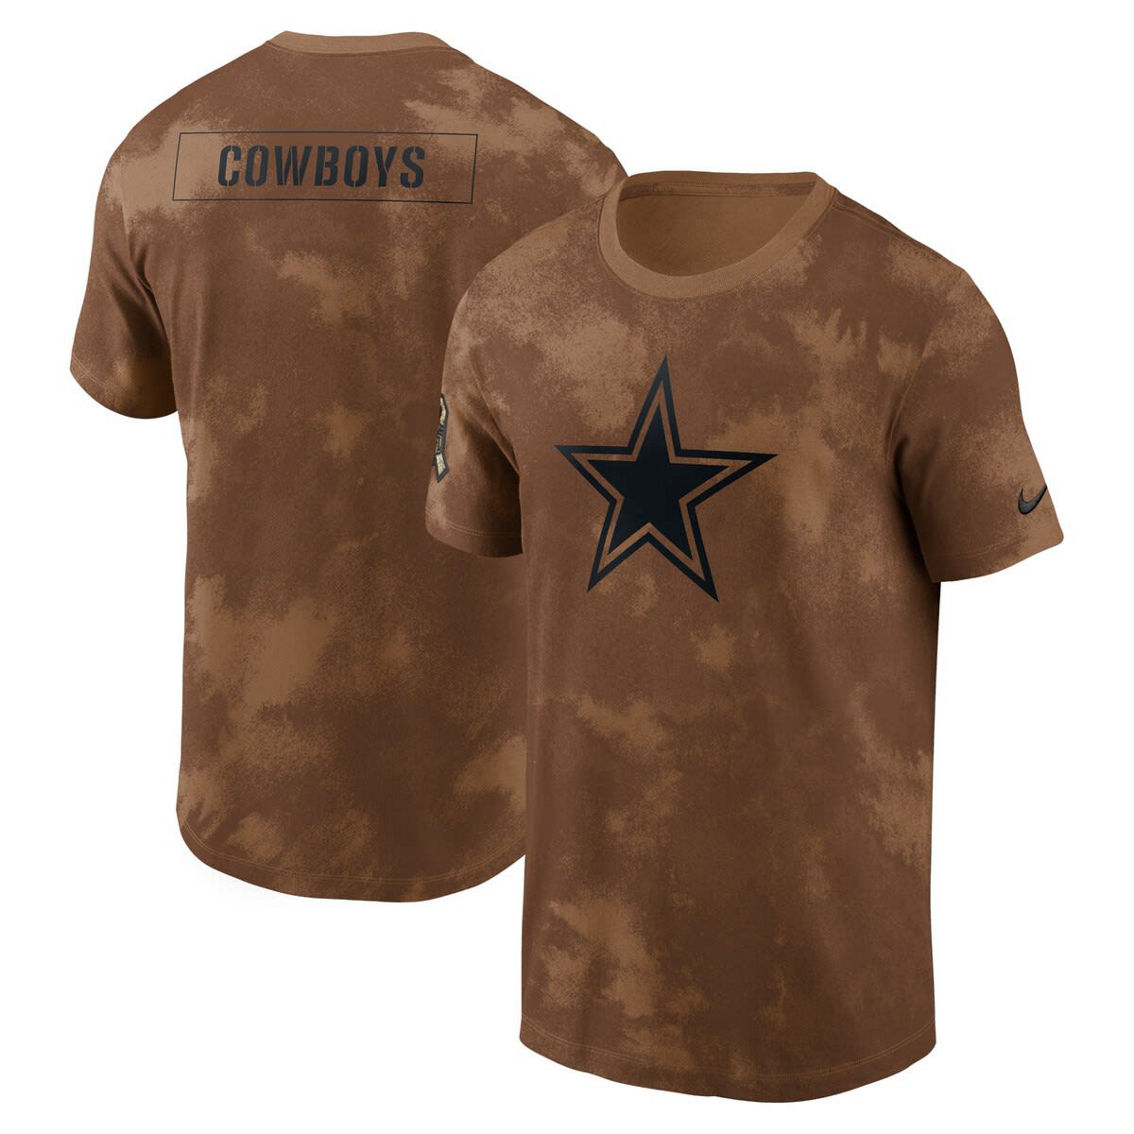 Nike Men's Brown Dallas Cowboys 2023 Salute To Service Sideline T-Shirt - Image 2 of 4